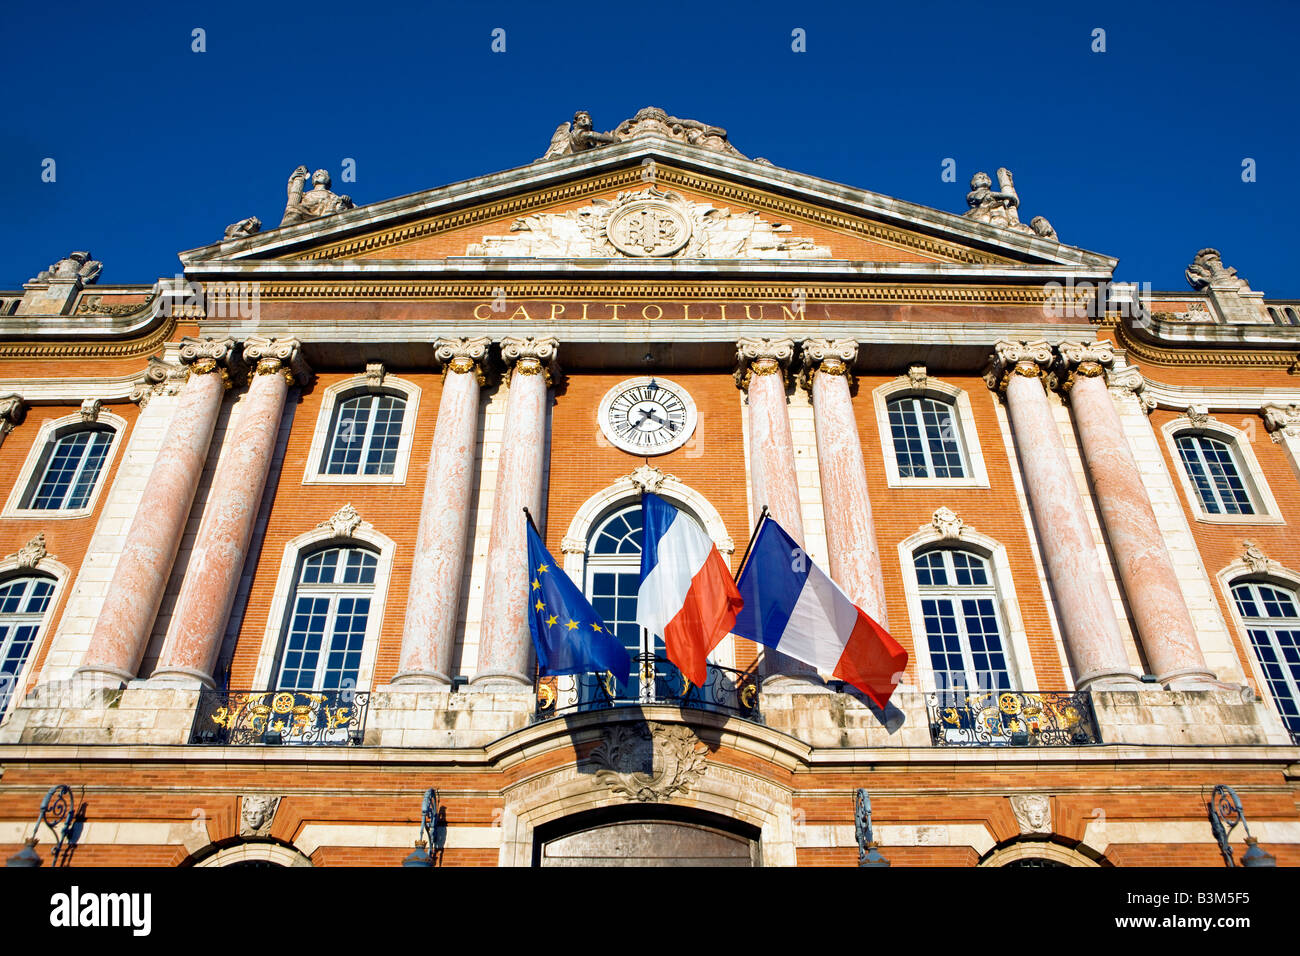 The Capitole building in Toulouse France Stock Photo